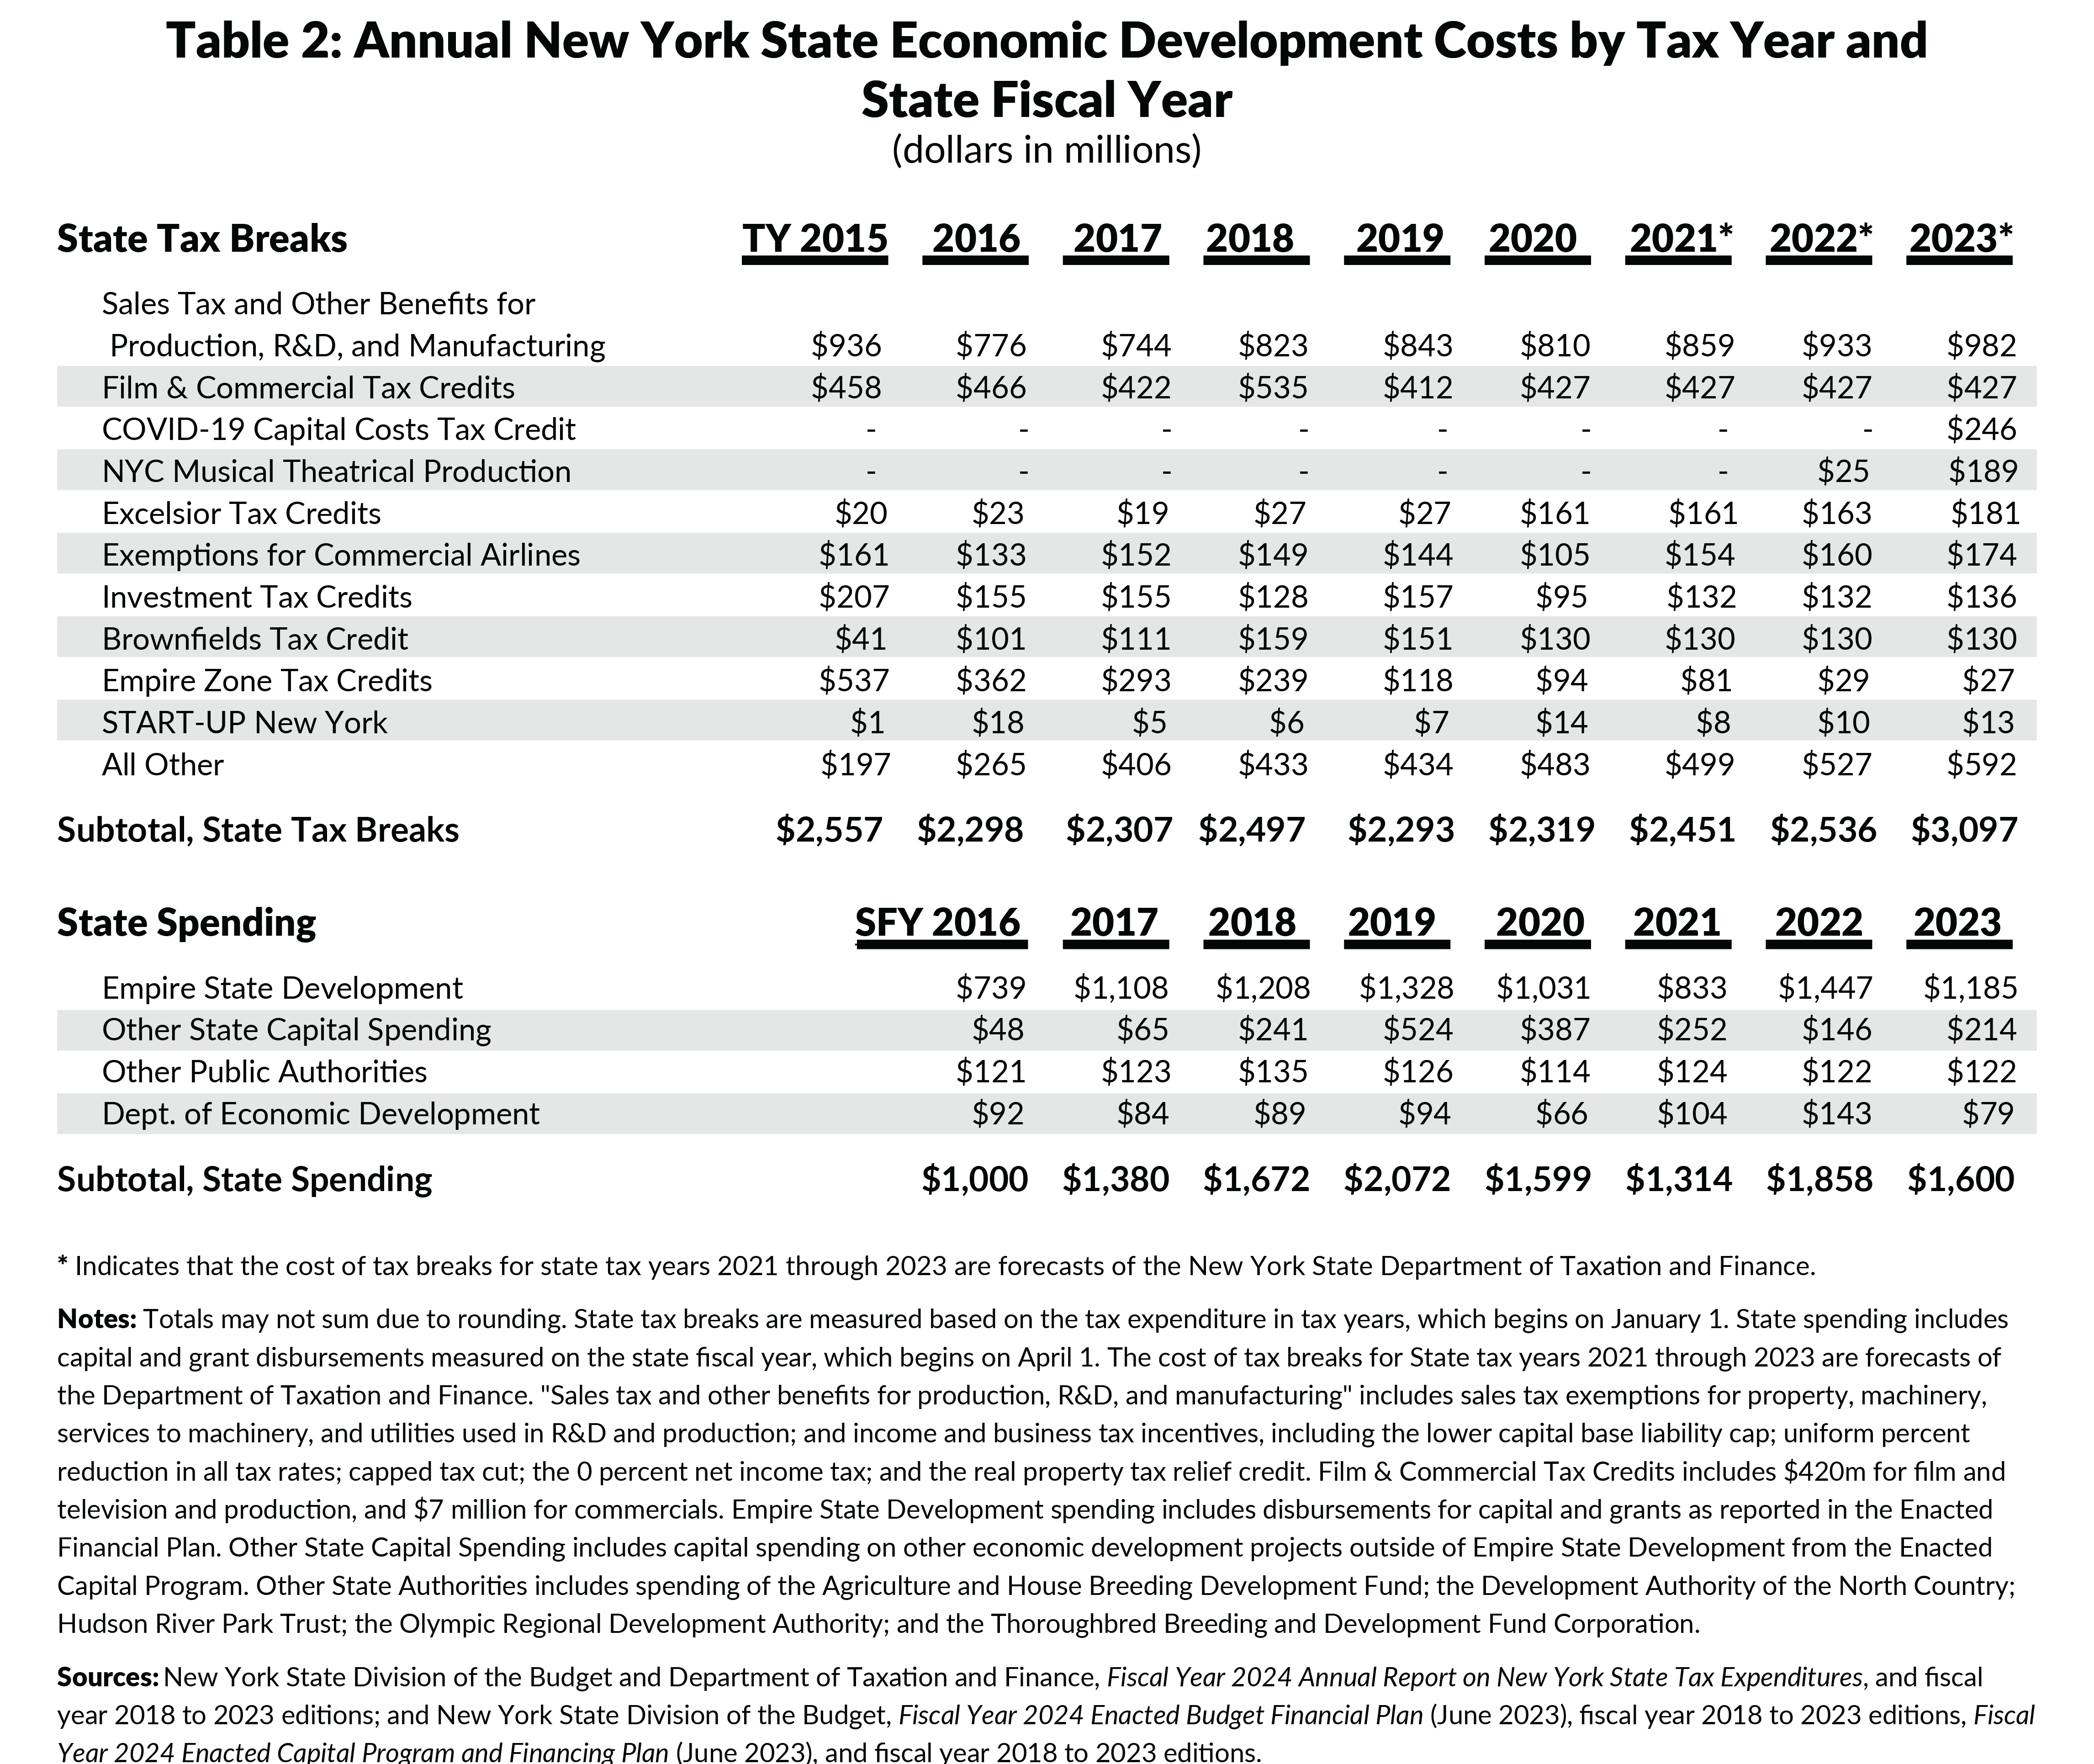  Table 2: Annual New York State Economic Development Costs by Tax Year andState Fiscal Year